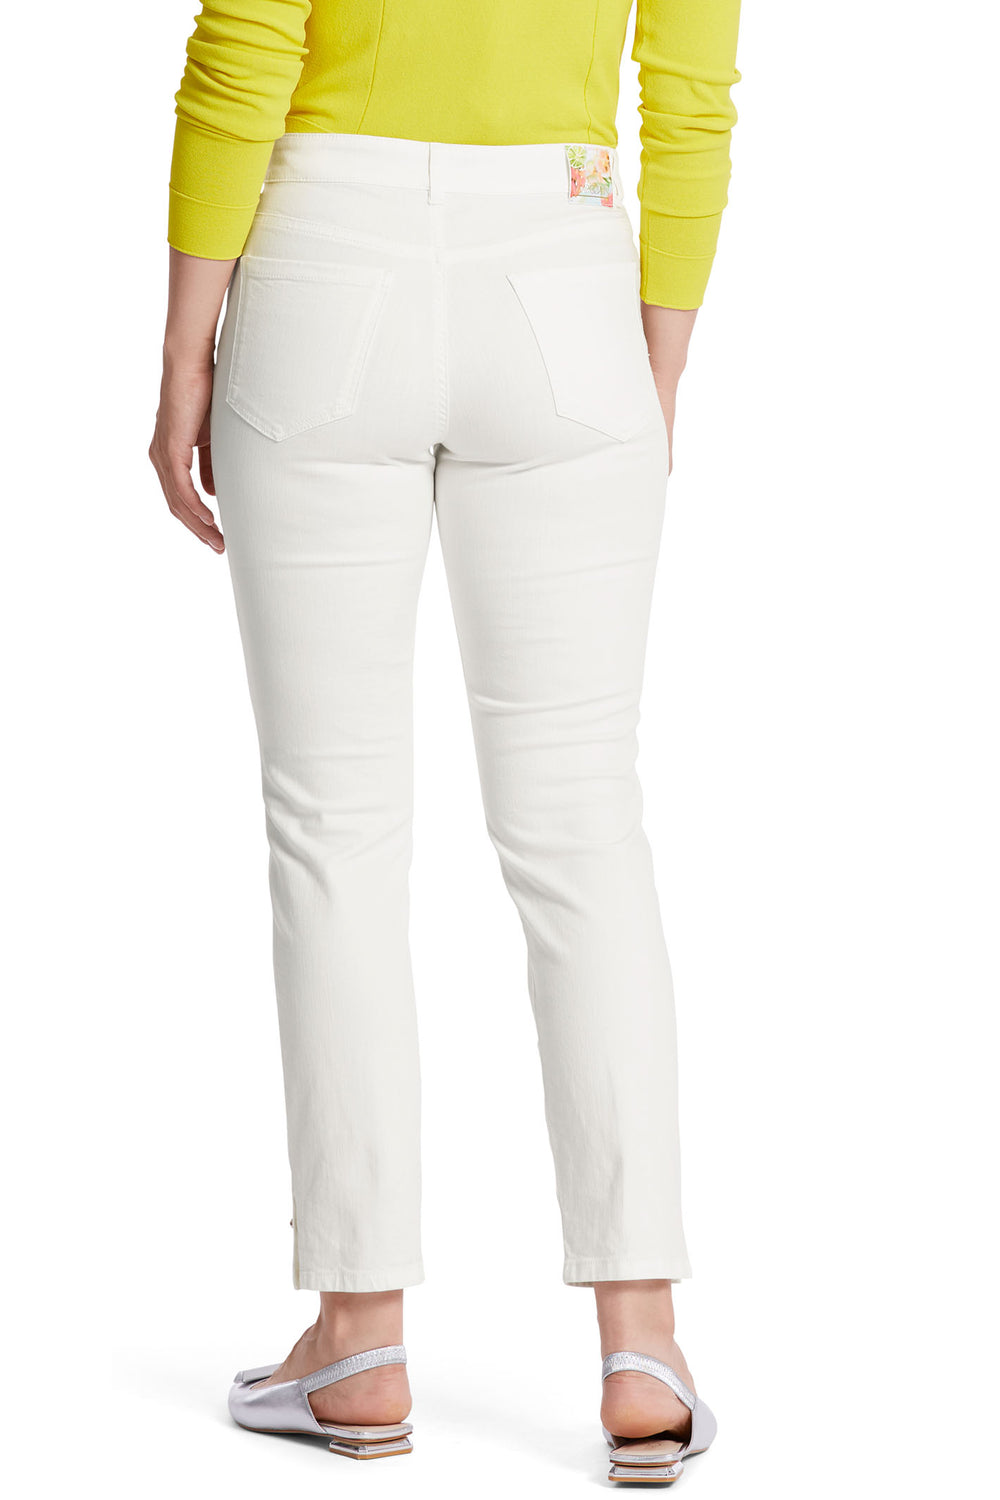 Marc Cain Collection WC 82.13 D69 110 Off White Silea Jeans - Olivia Grace Fashion